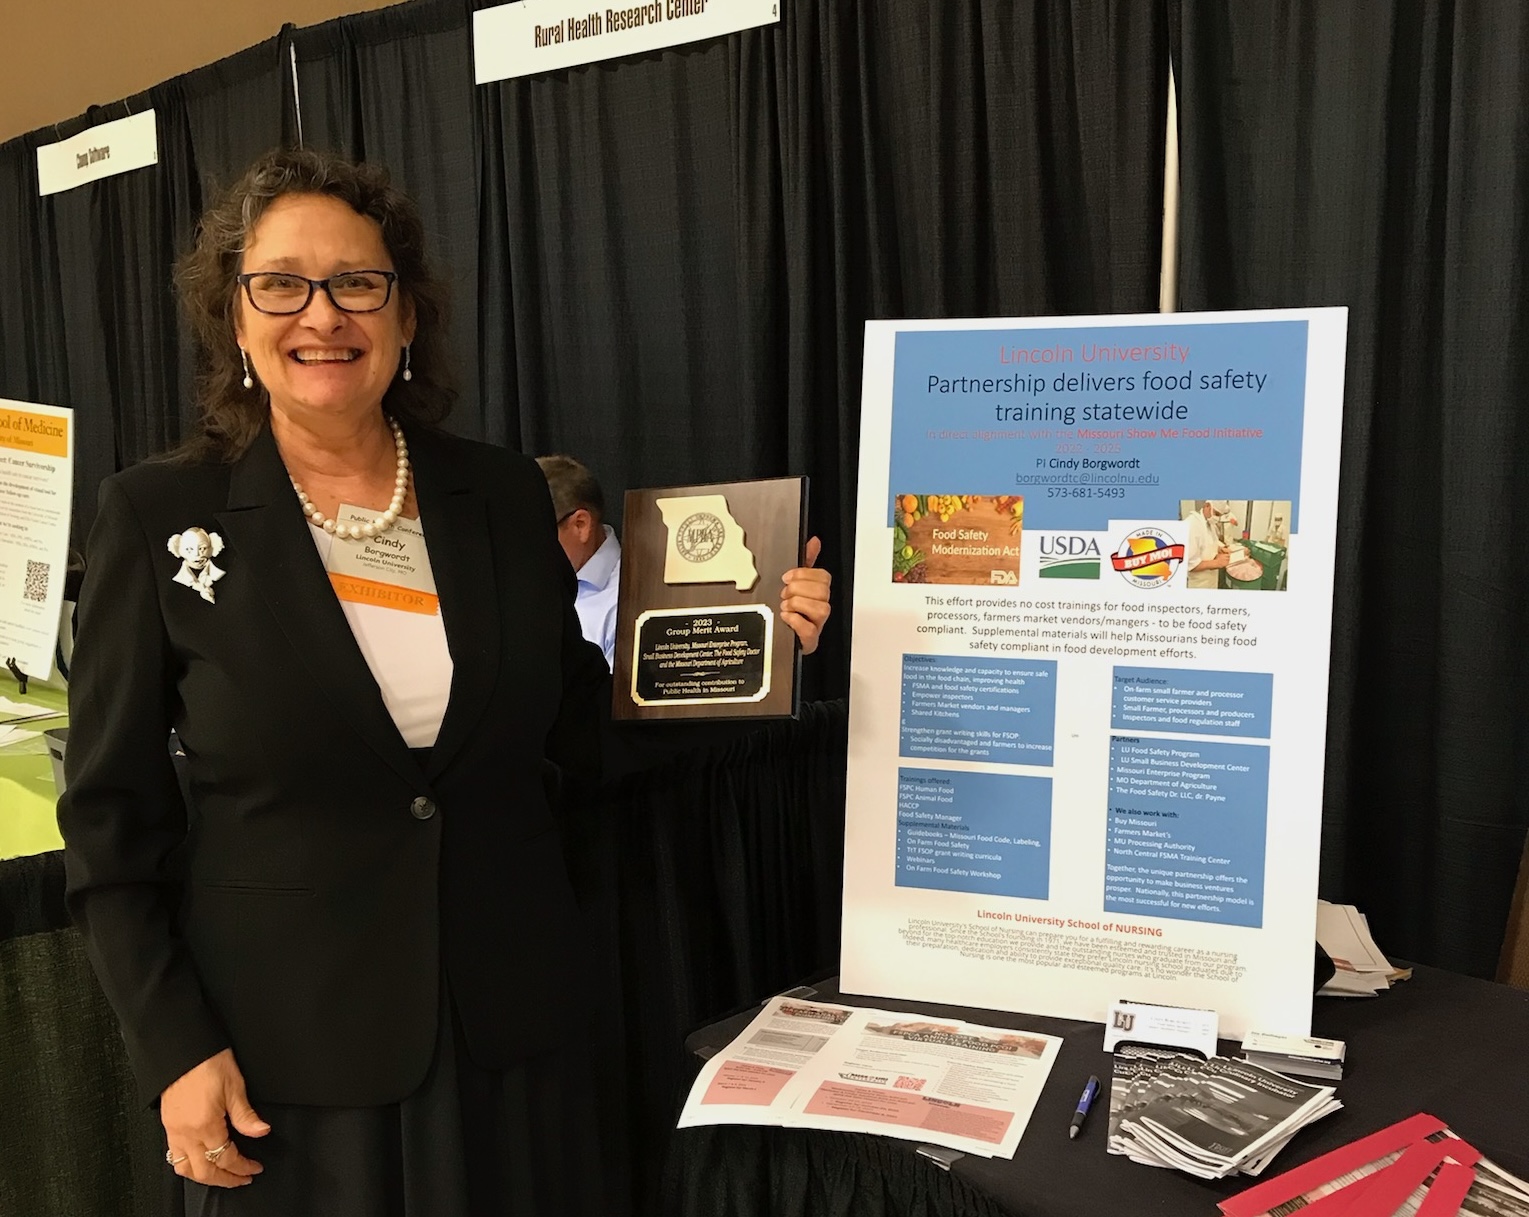 Cindy Borgwordt, food safety specialist at Lincoln University's Cooperative Research, proudly accepts the Merit Award from the Missouri Public Health Association on behalf of the dedicated Food Safety Partnership team. Their efforts in food safety education and outreach are making a significant impact on the health and well-being of Missourians.